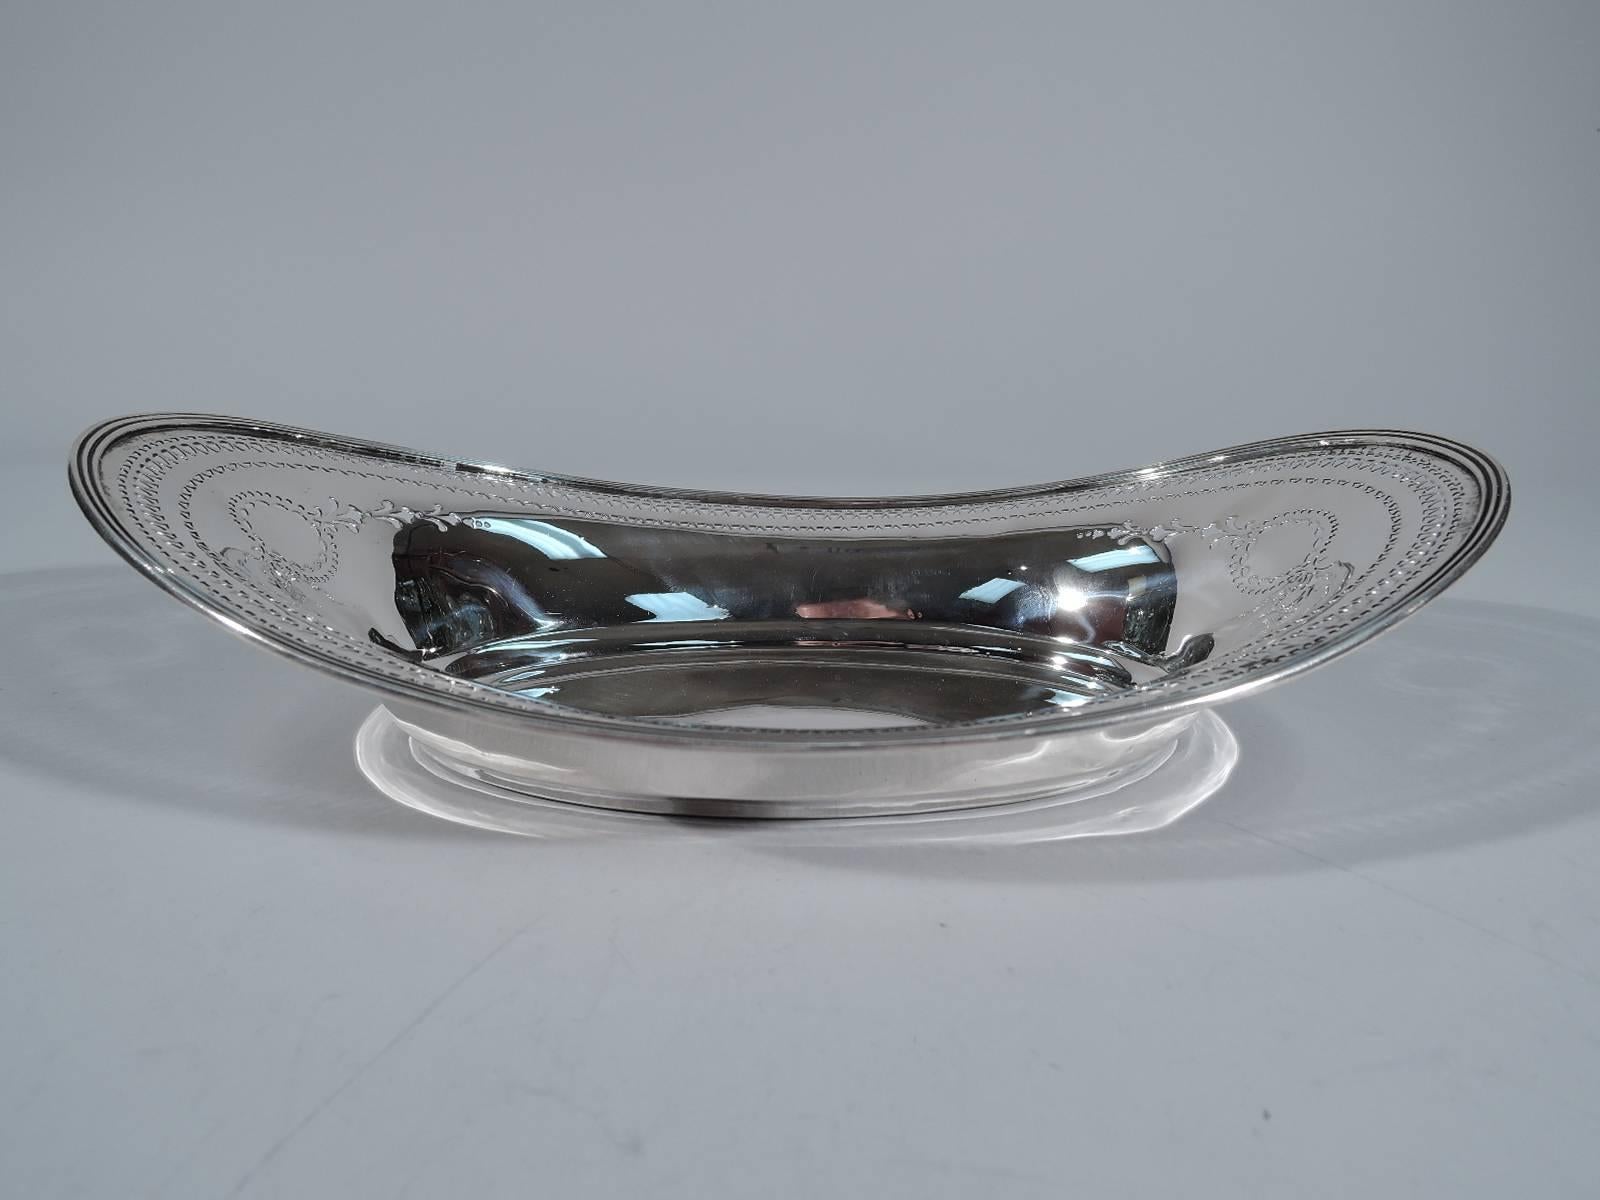 Edwardian sterling silver bread tray. Made by Tiffany & Co. in New York, circa 1912. Oval well and reeded asymmetrical rim. Pierced geometric border and at ends stylized wreath and garland. Hallmark includes pattern no. 18198B (first produced in